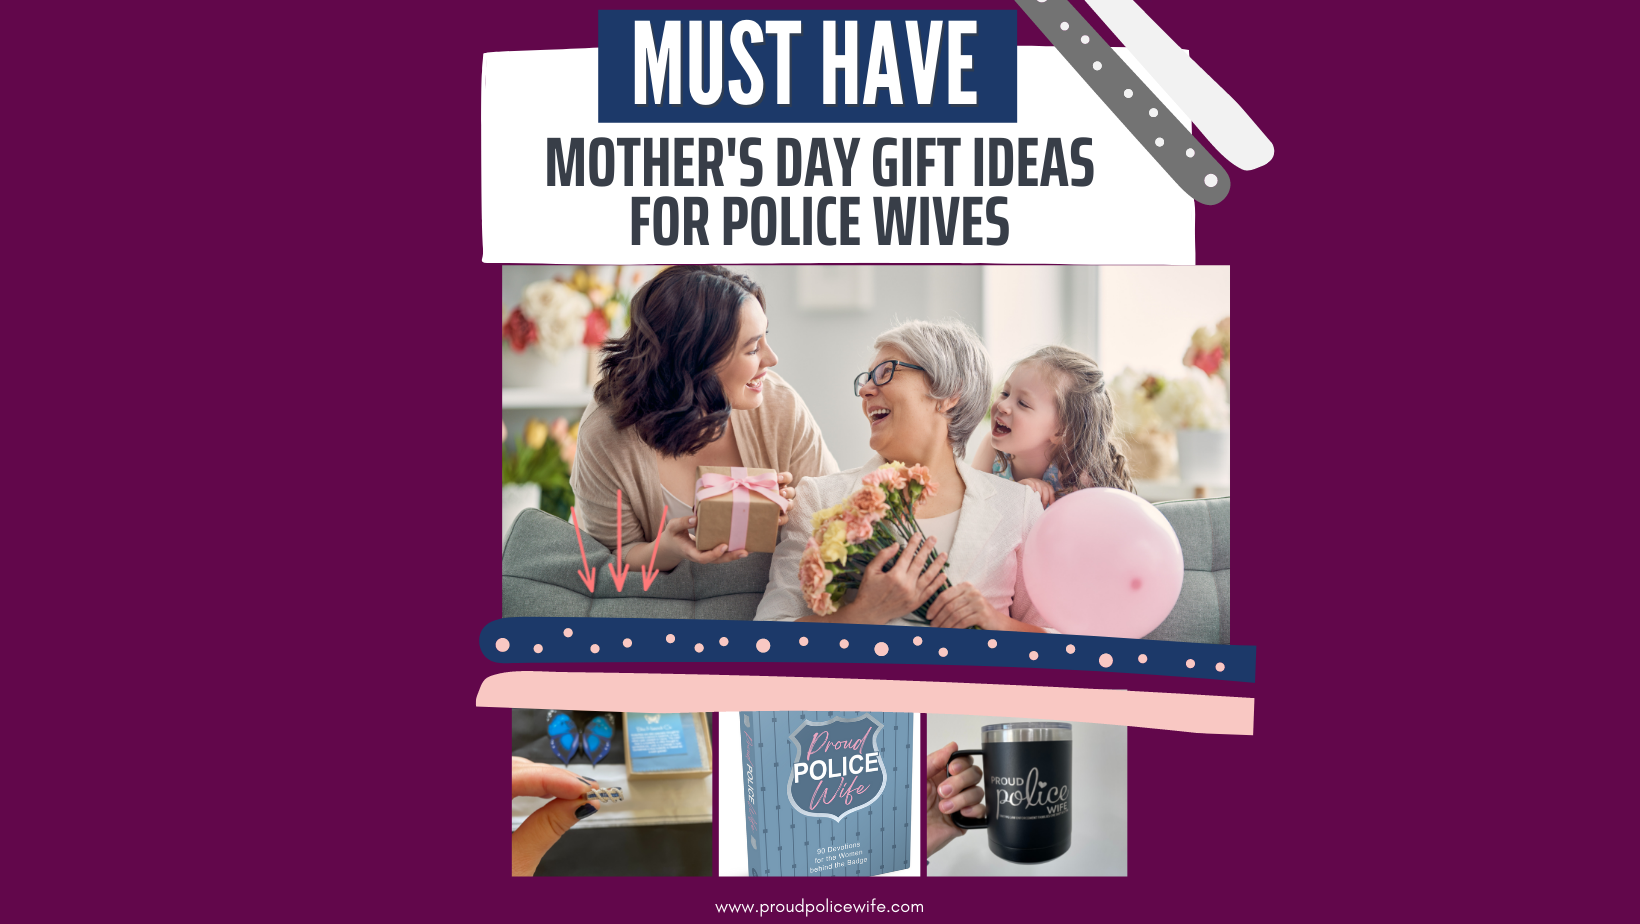 MUST HAVE MOTHER'S DAY GIFT IDEAS: FOR THE POLICE WIFE